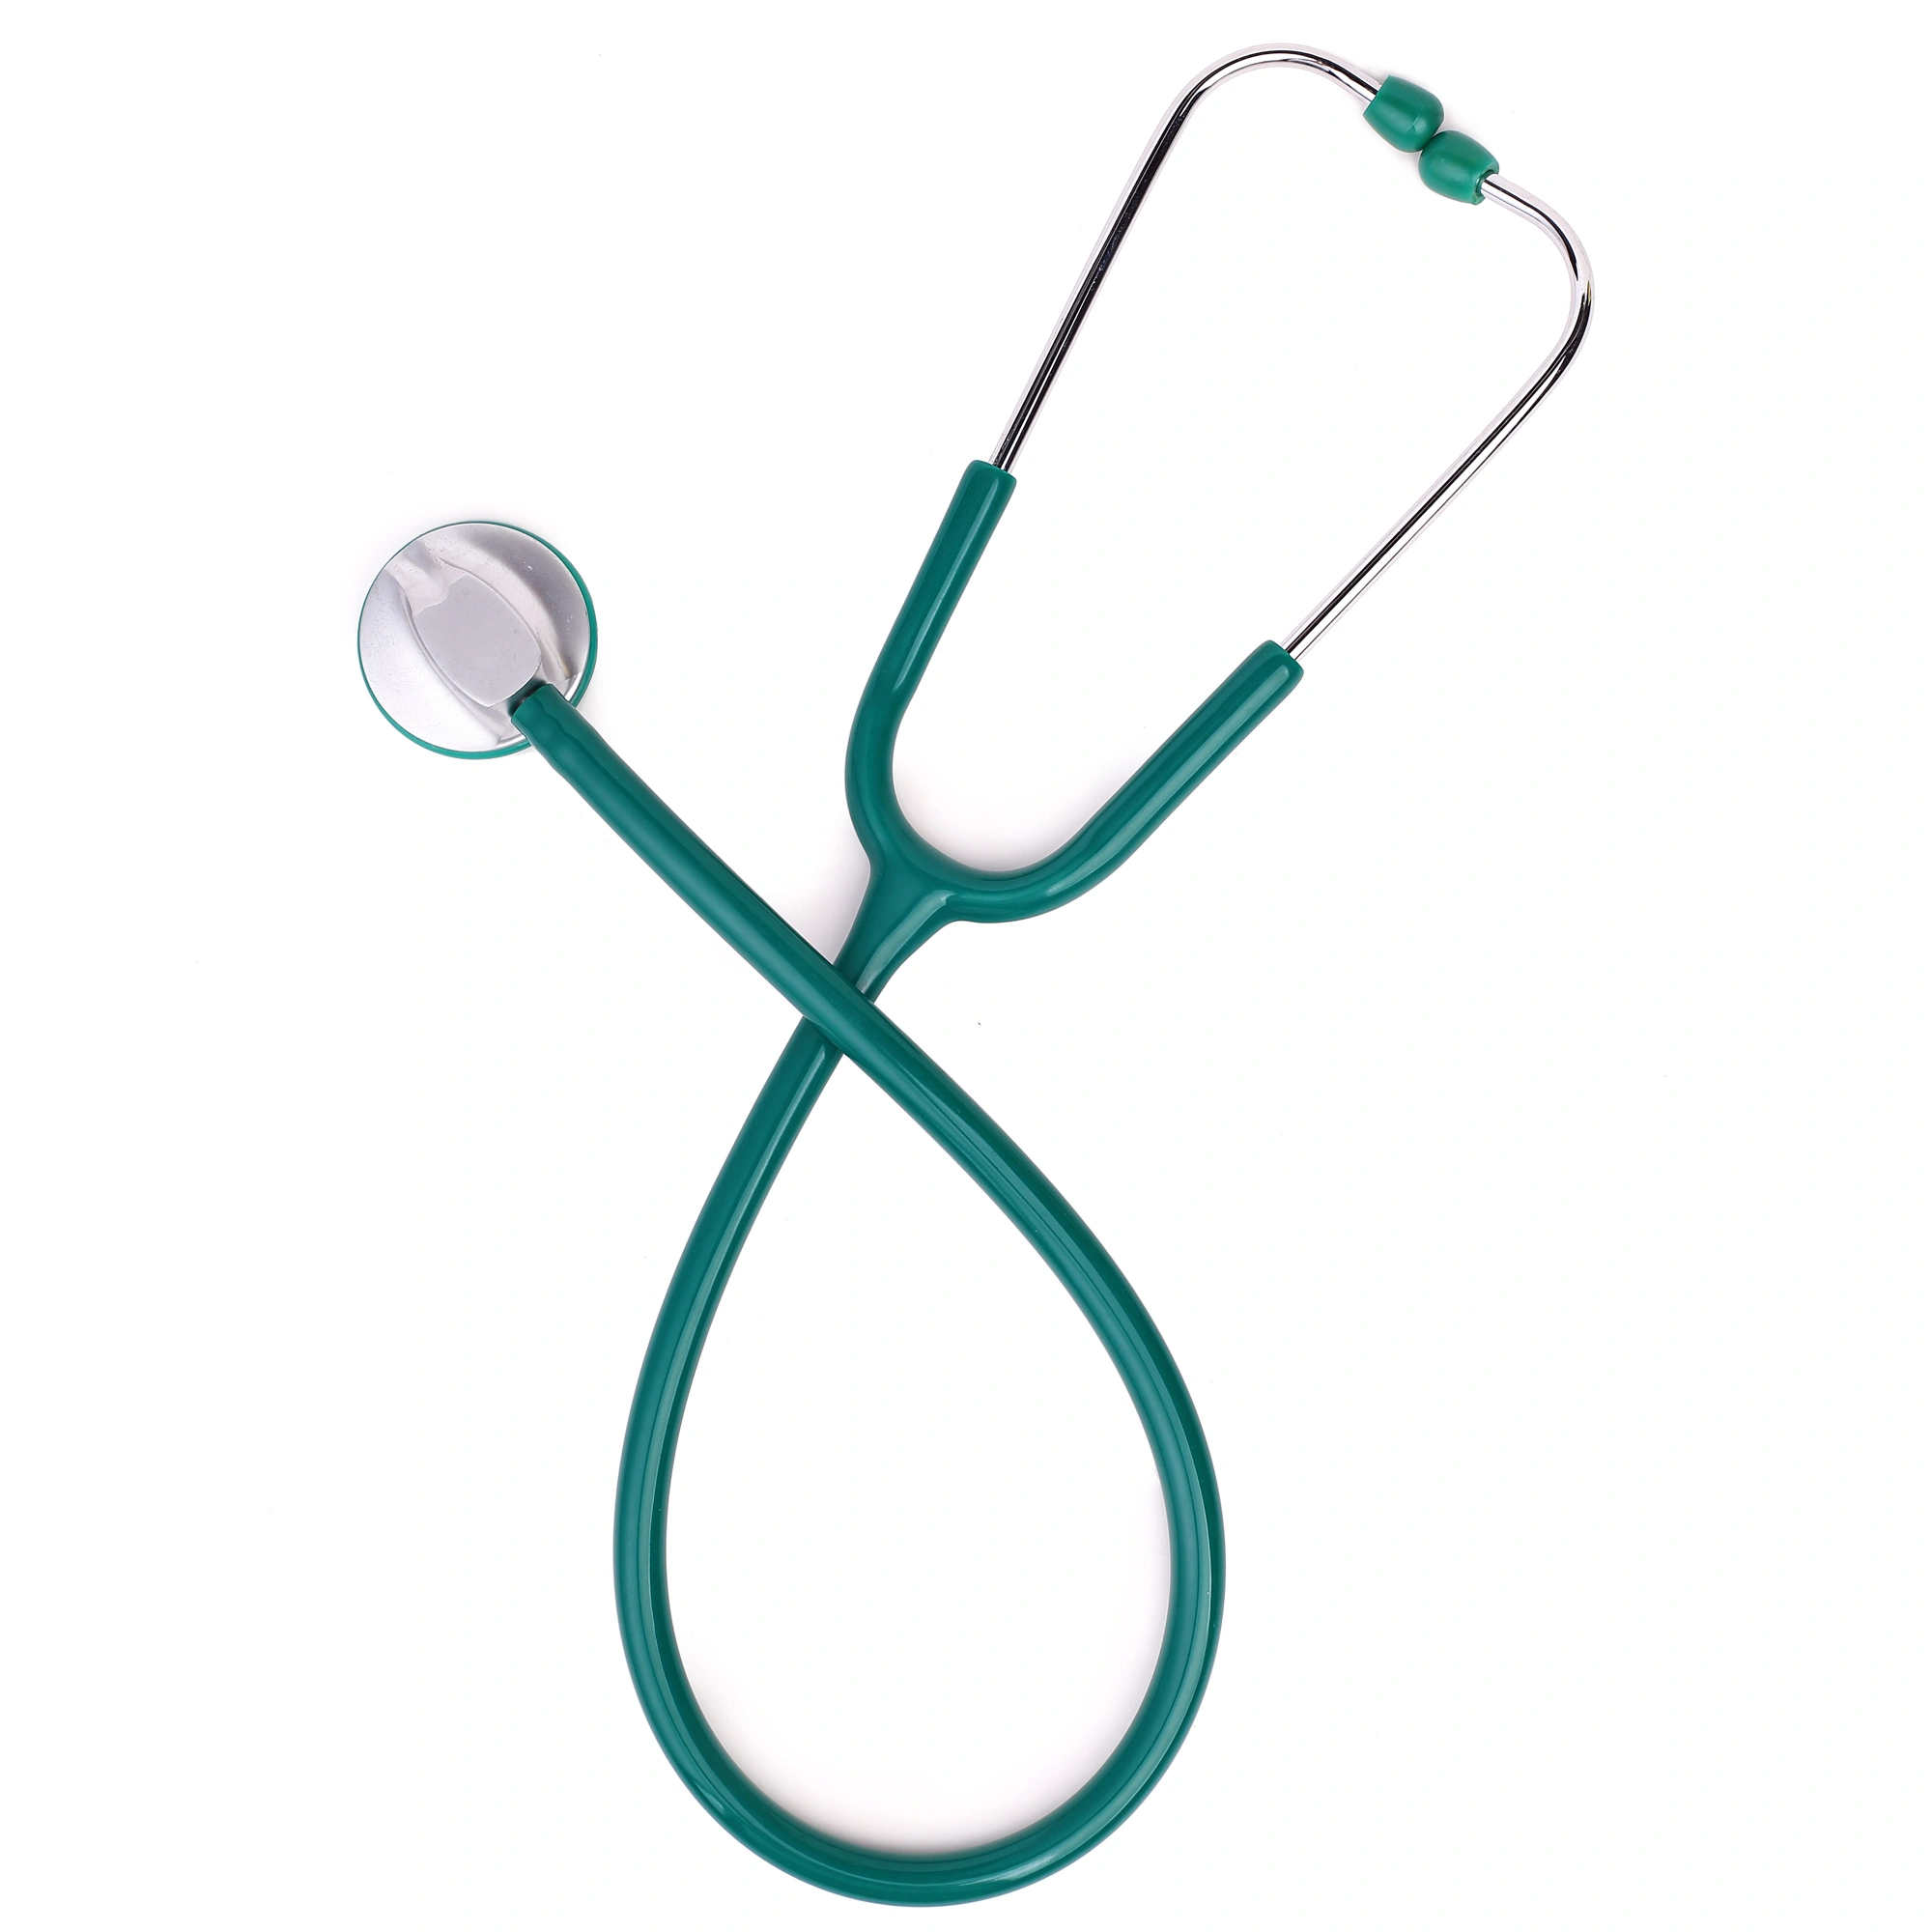 Classic Stethoscope Supplier